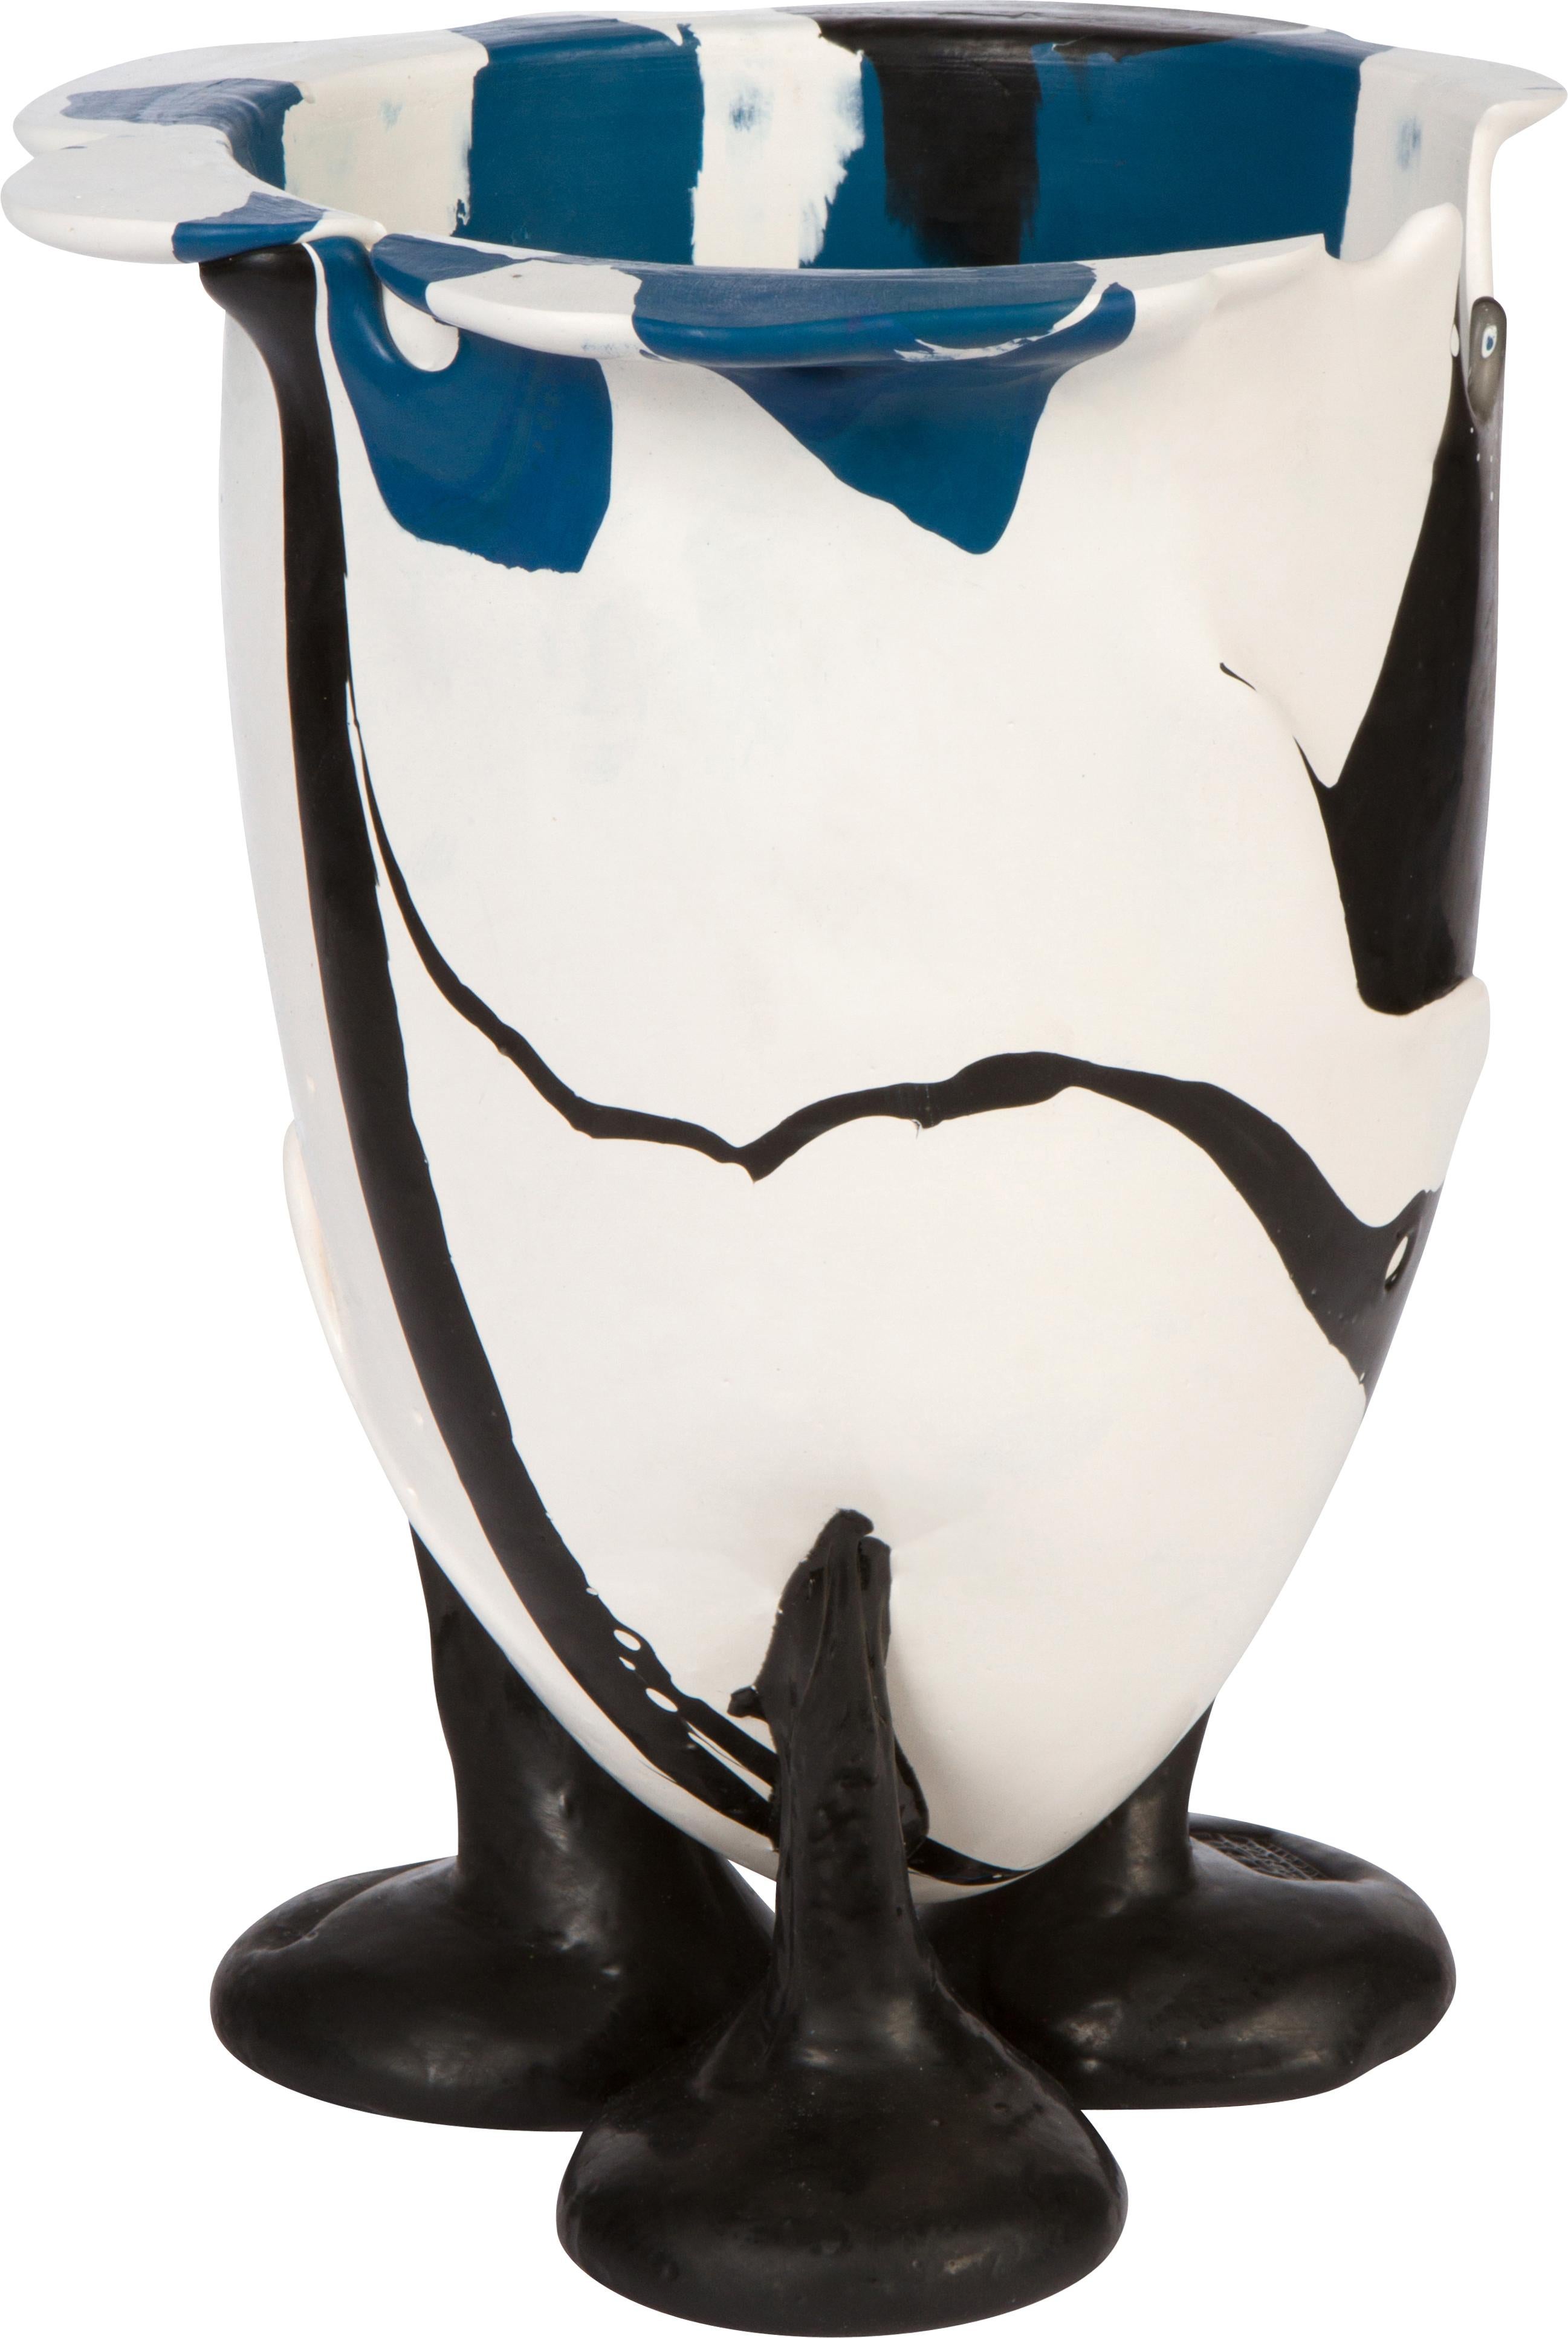 Playful, abstract design vase of cast resin in colors of blue, back and white by architect and designer, Gaetano Pesce. Signed and stamped, 2008.